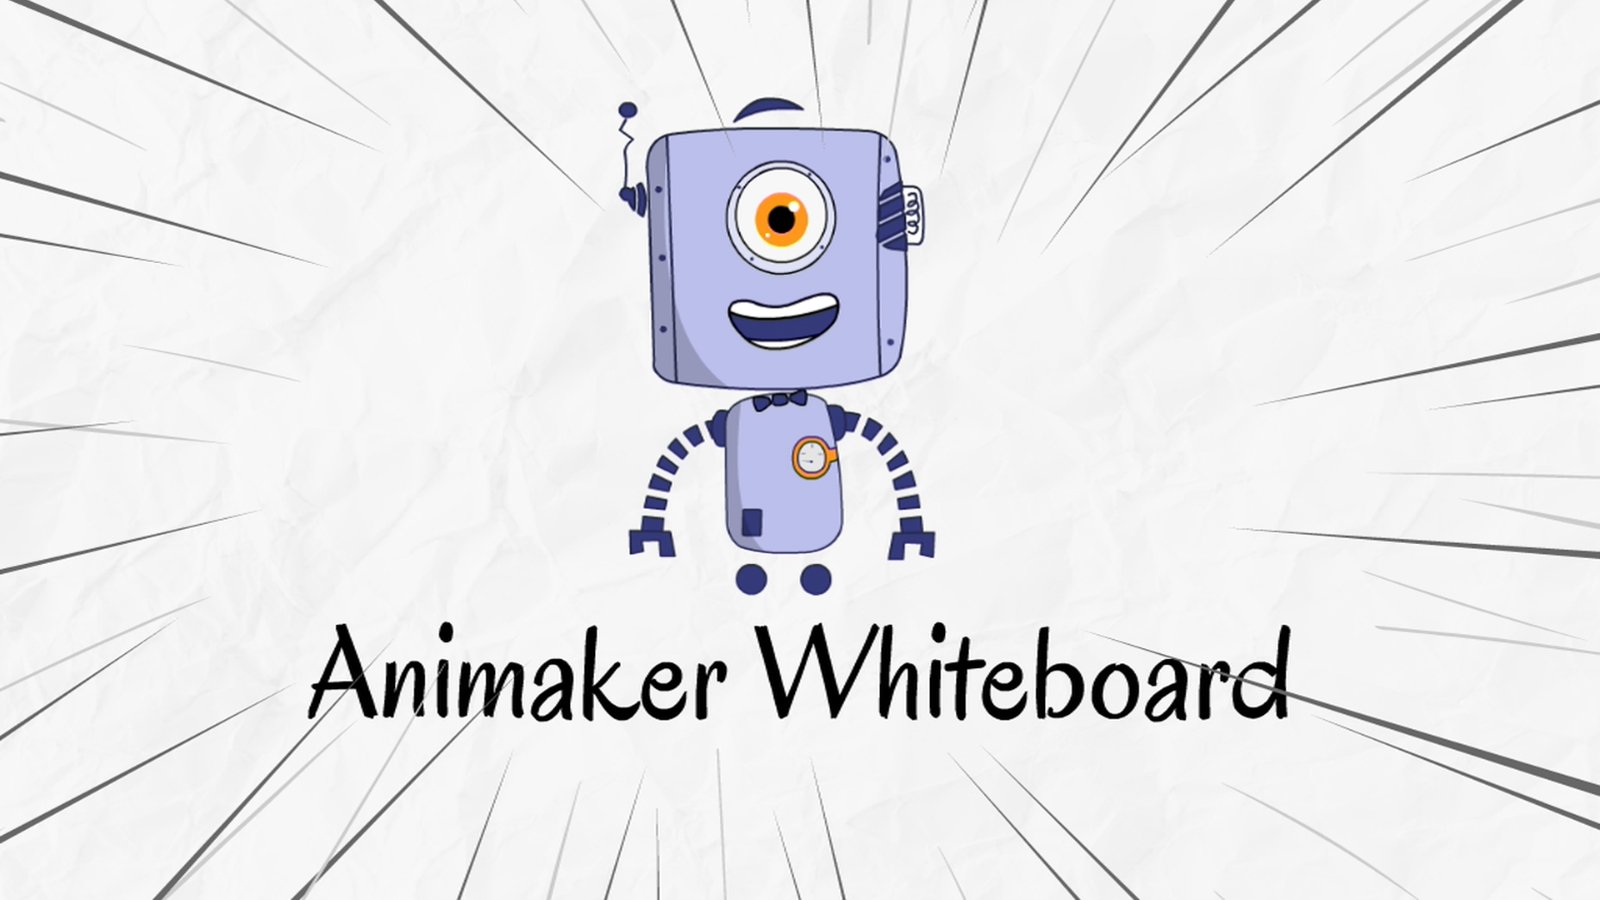 Whiteboard Animation Software - with 5 new styles!